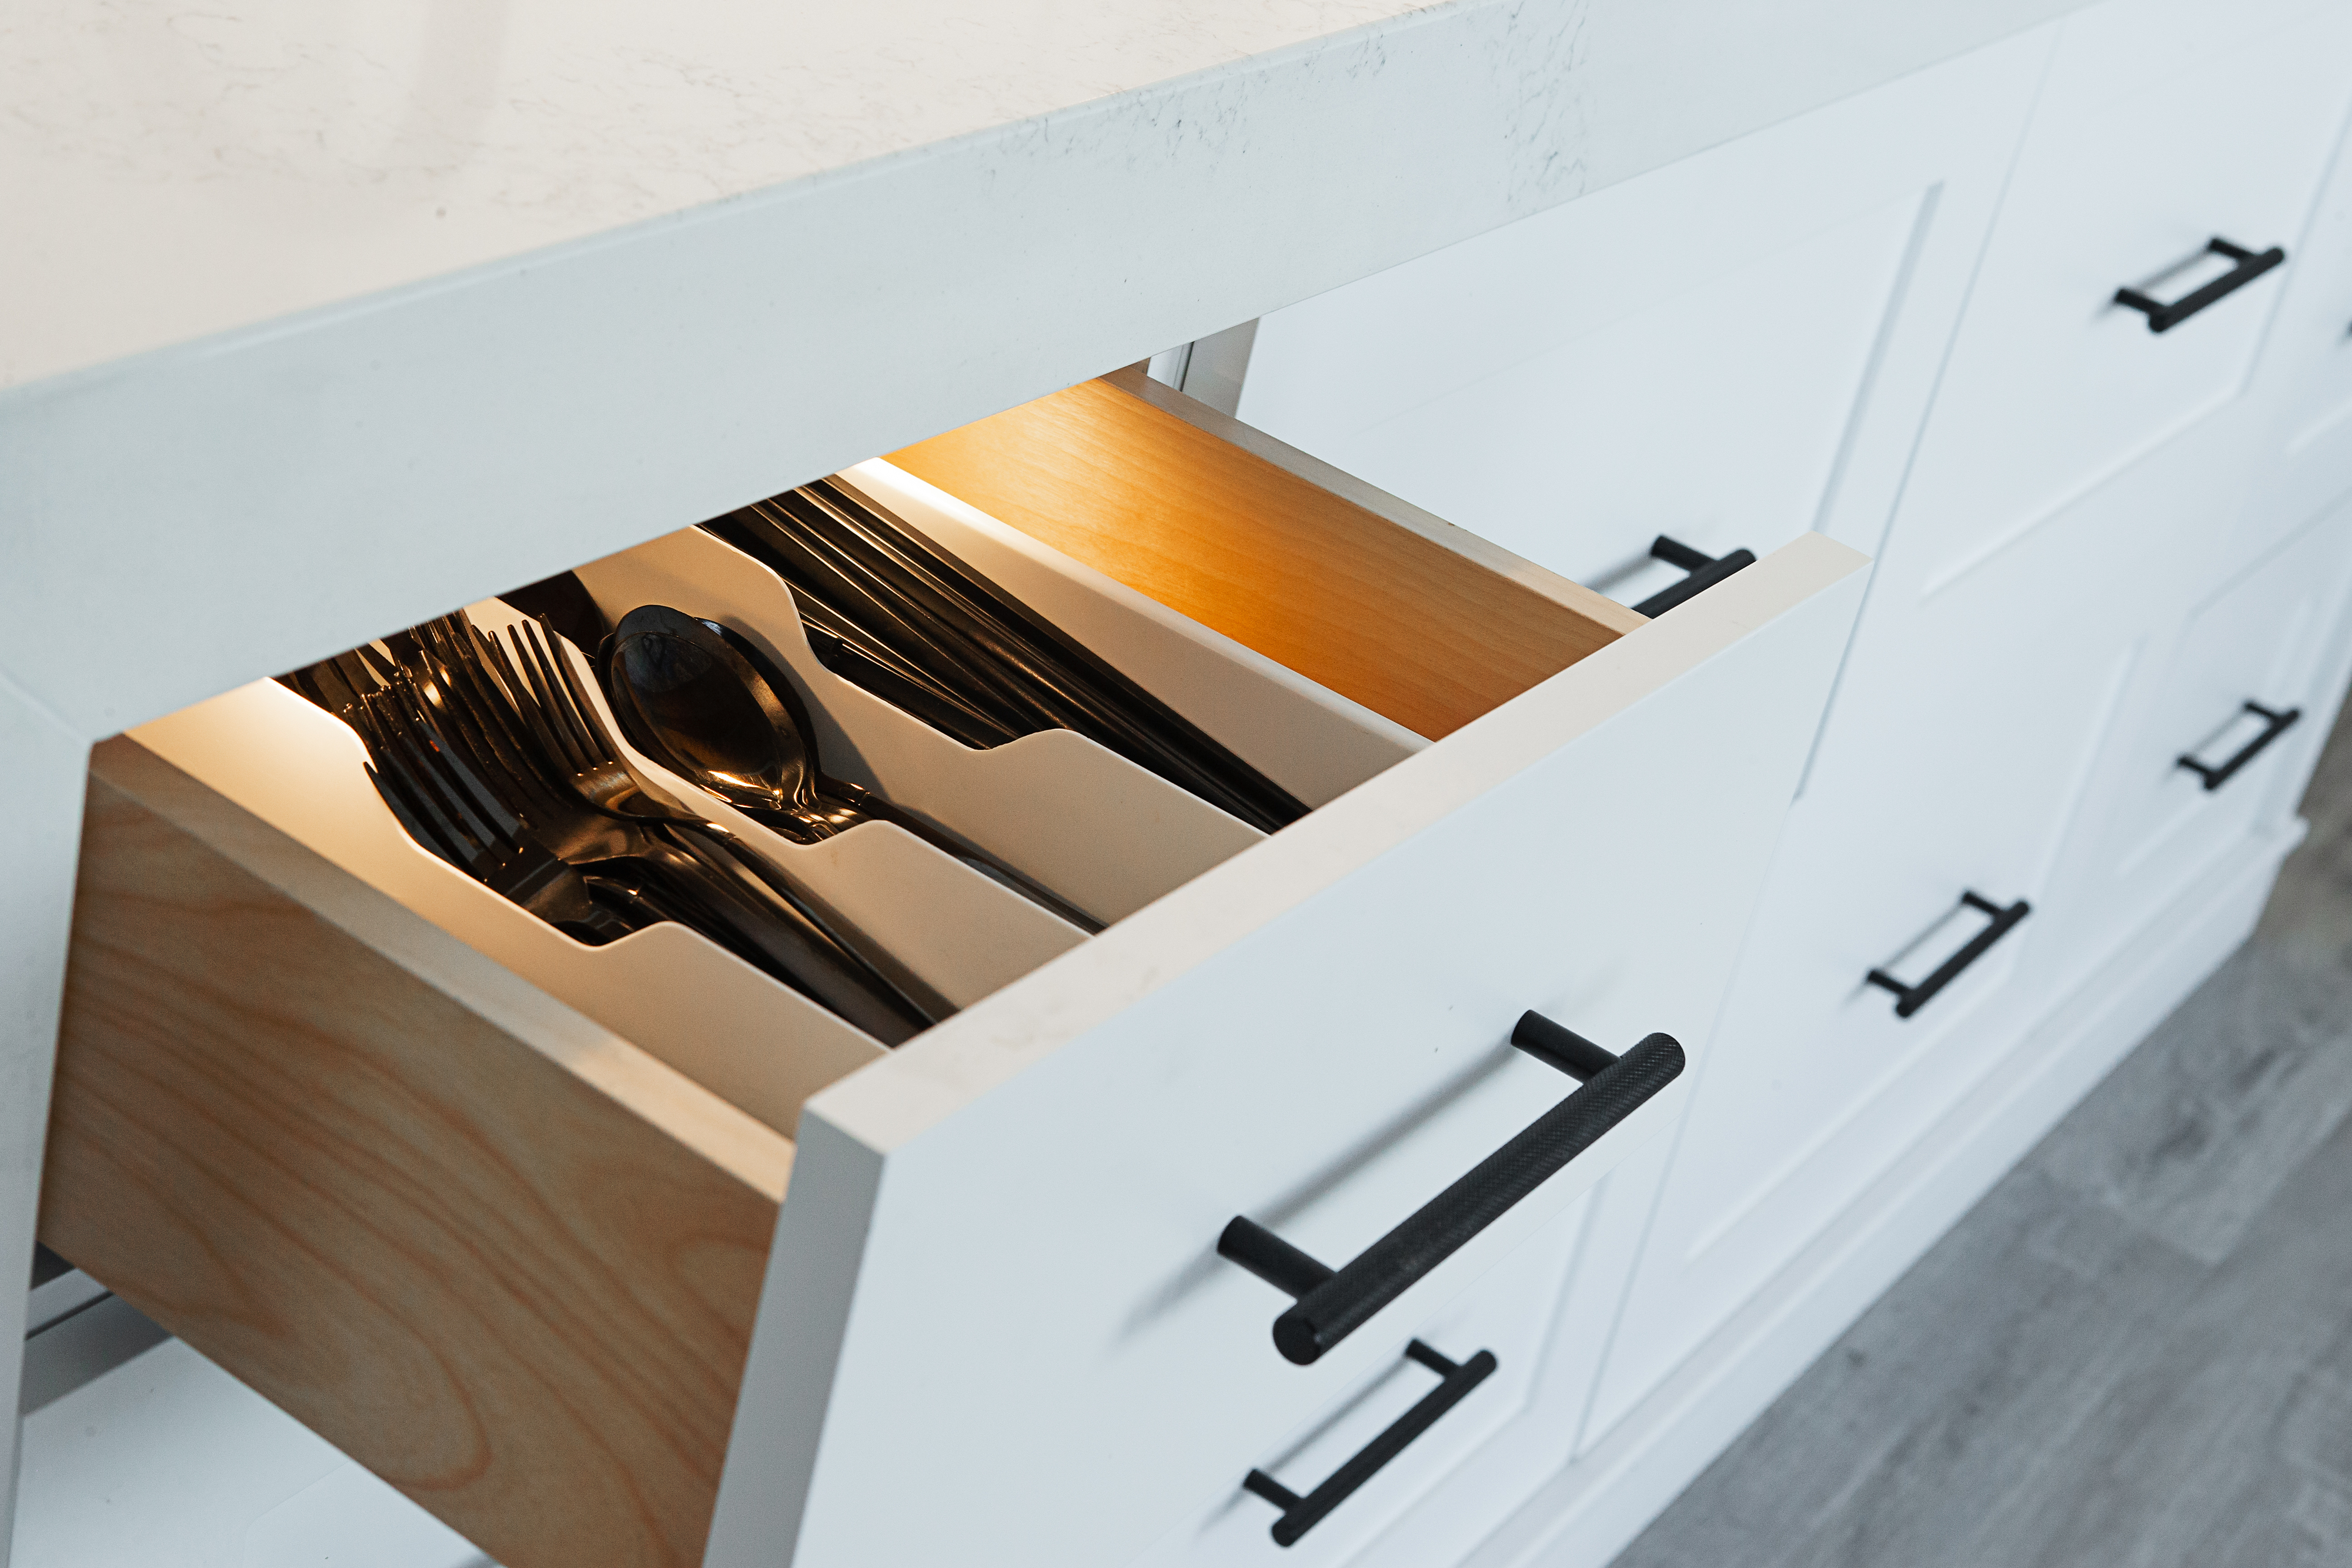 An open kitchen drawer organizing various silverware neatly in compartments